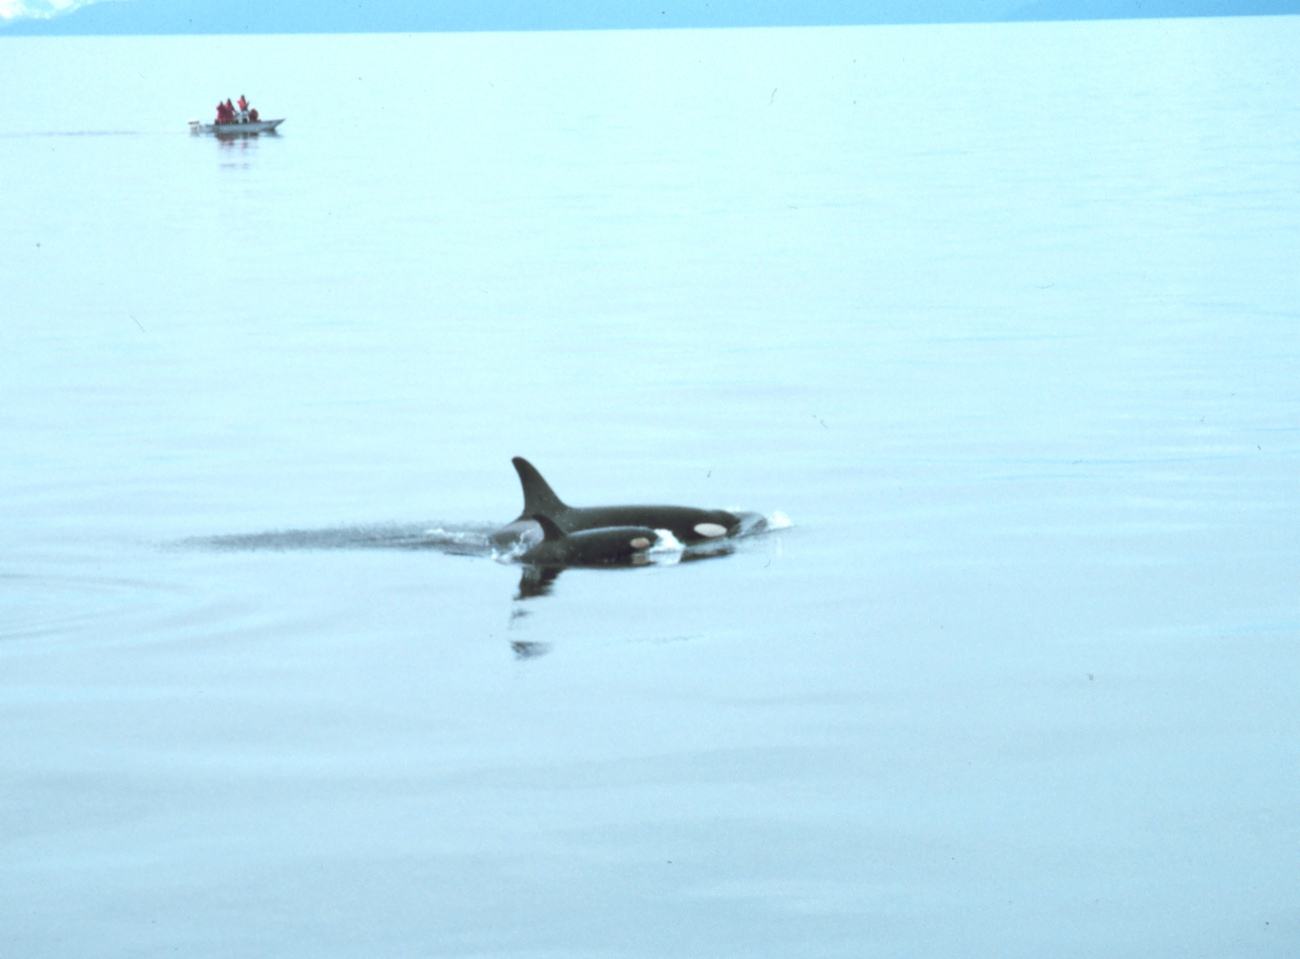 Marine mammal observers watching mother killer whale and calf - Orcinus orca